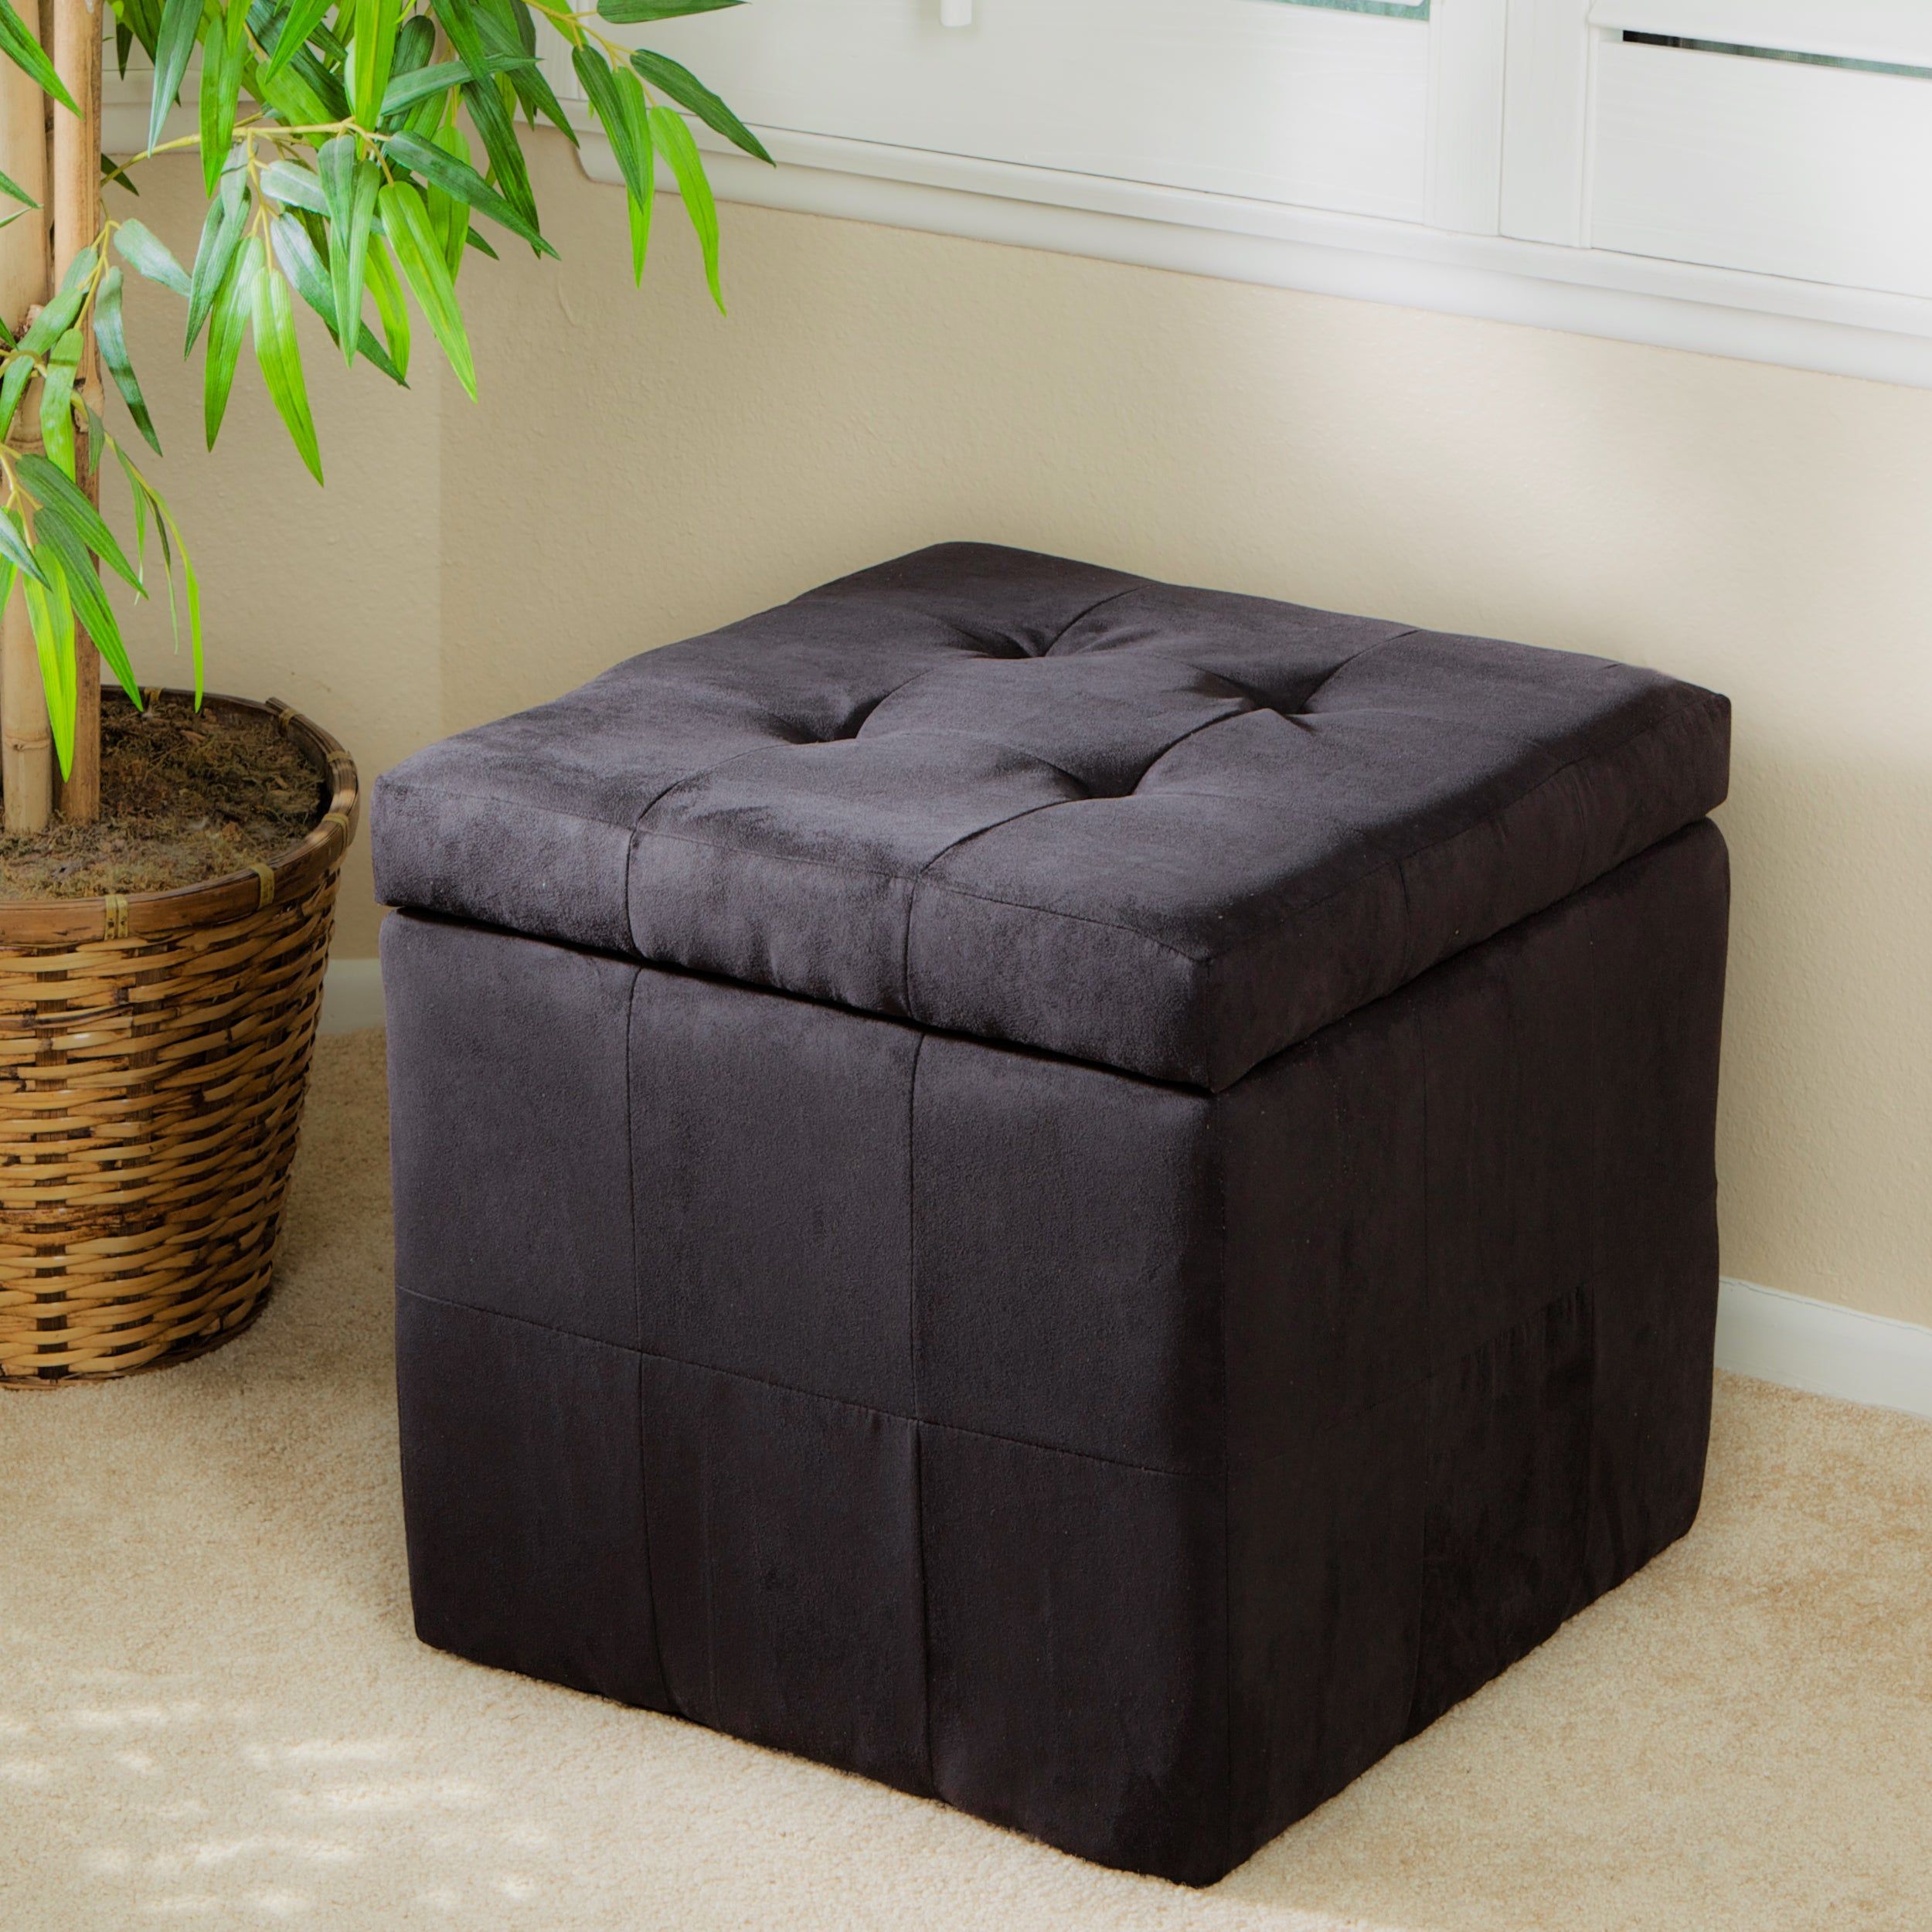 Tufted Black Fabric Storage Cube Ottoman – Free Shipping Today Regarding Dark Blue Fabric Banded Ottomans (View 8 of 20)